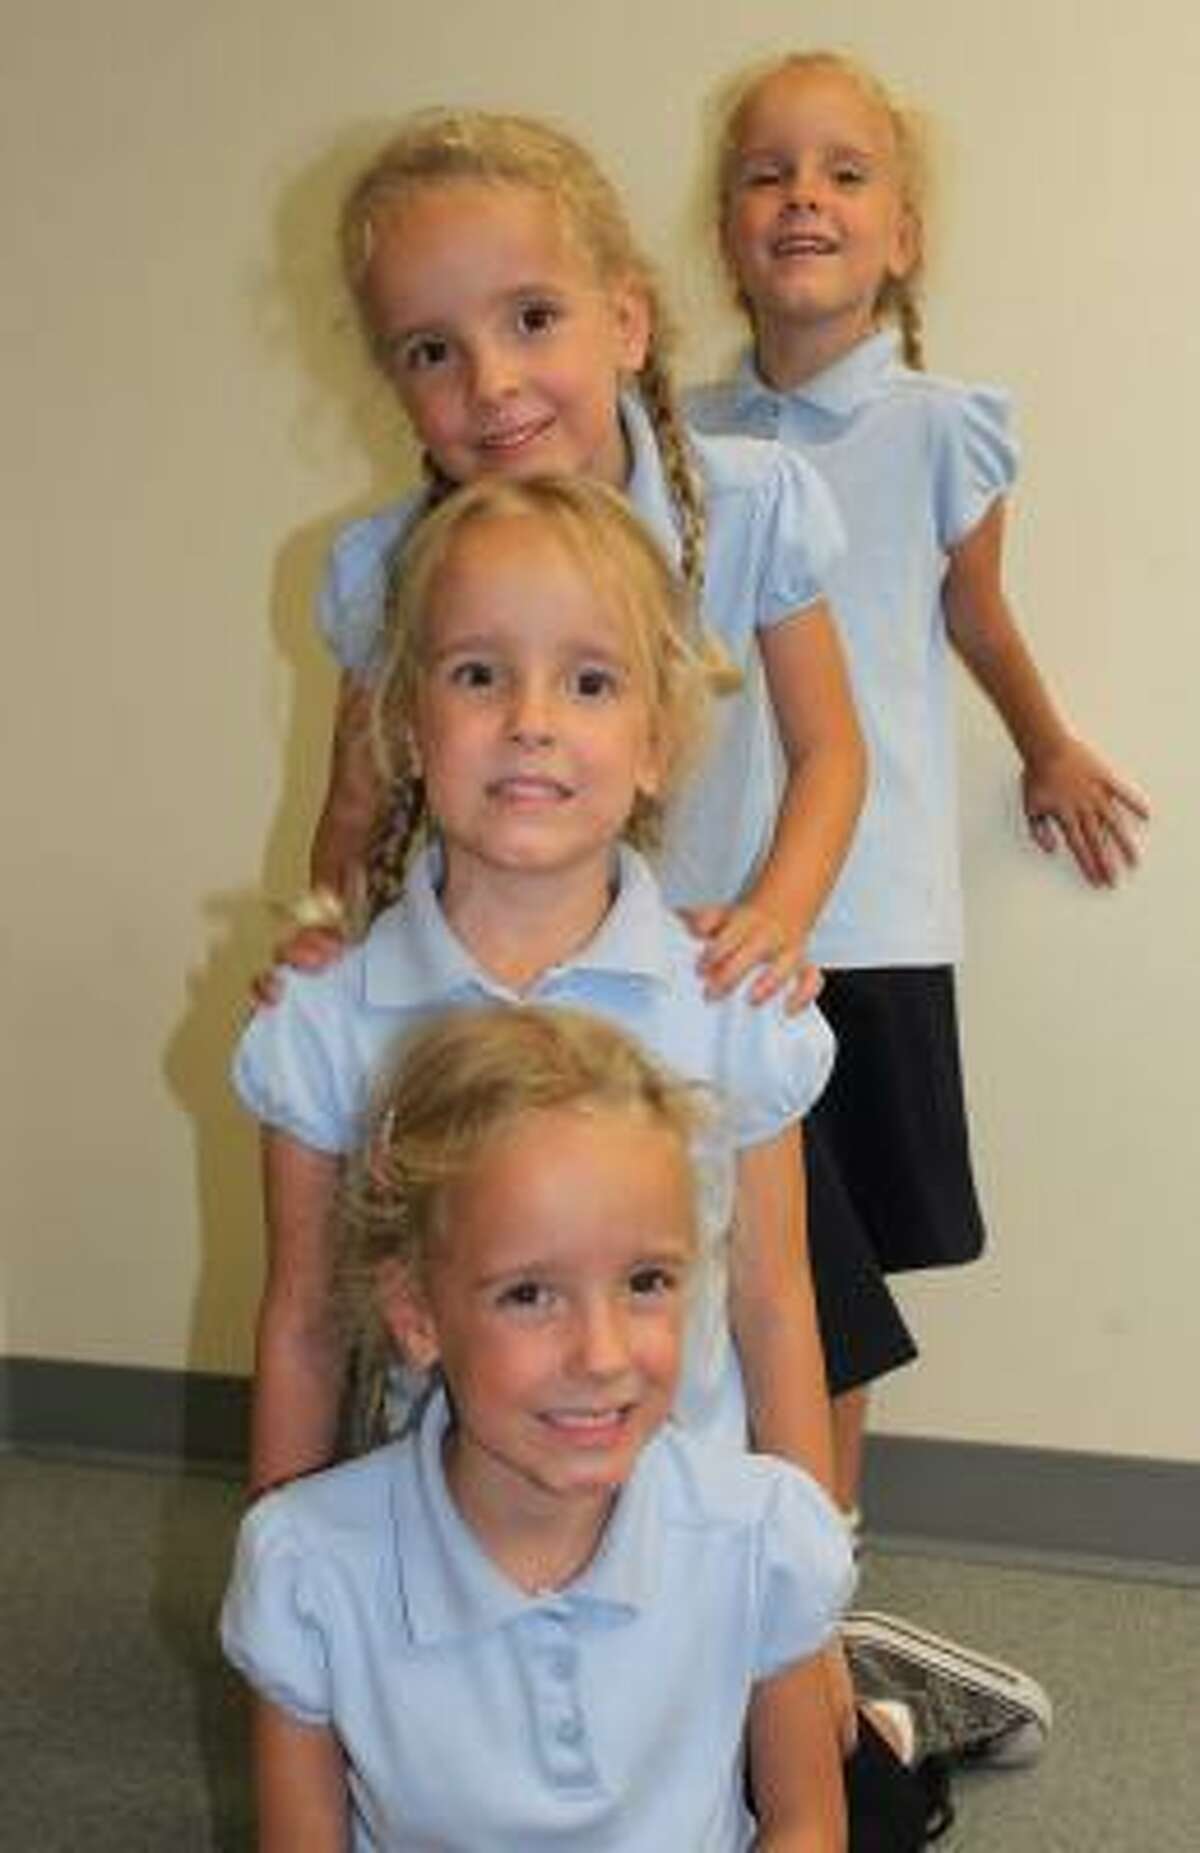 WHO'S WHO: The Breedlove sisters are in kindergarten at Marek Elementary School in Pearland.